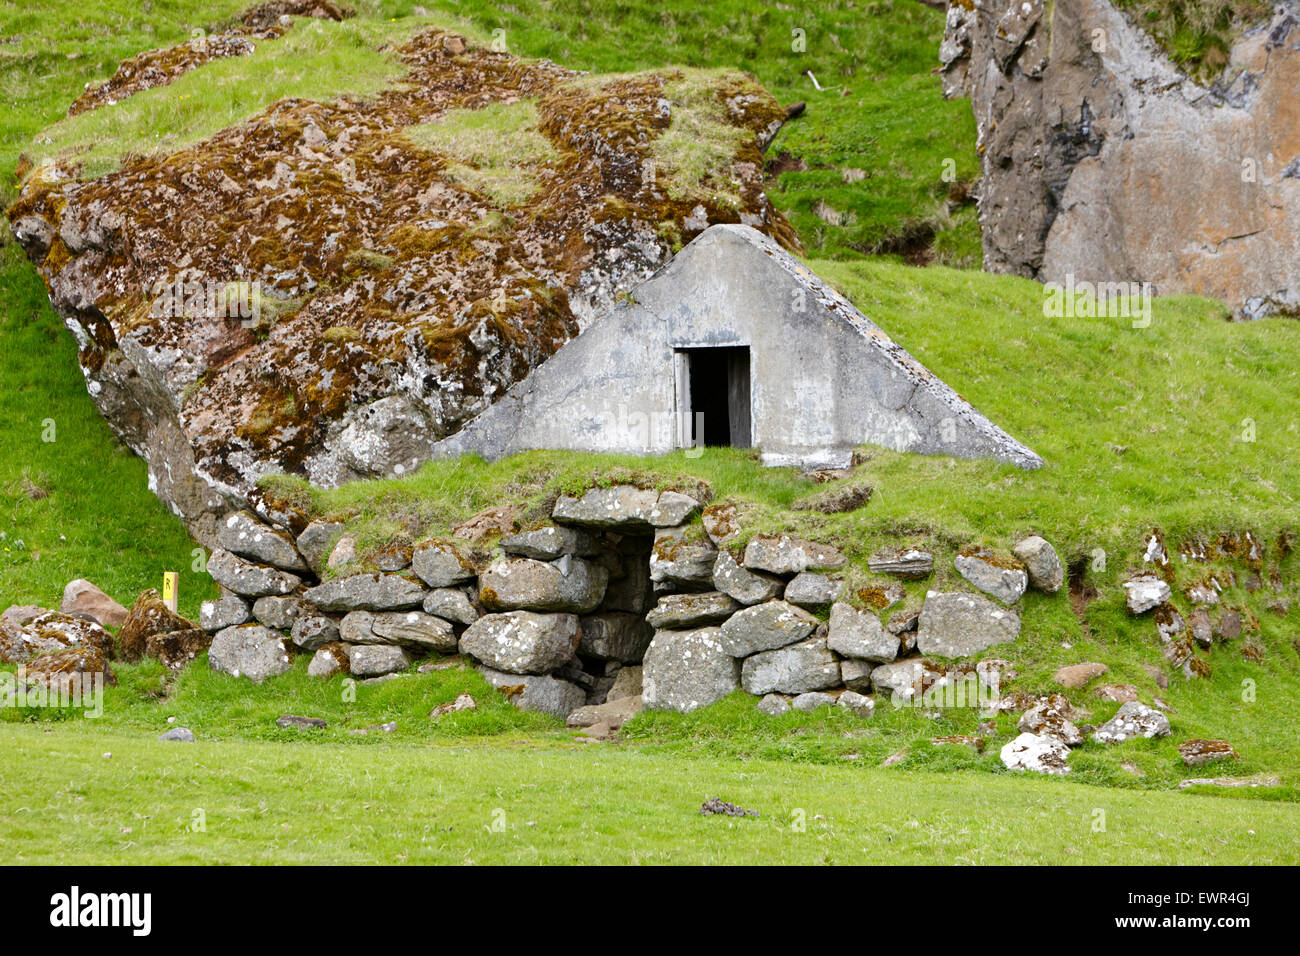 grass turf roofed old sheep hut Iceland Stock Photo